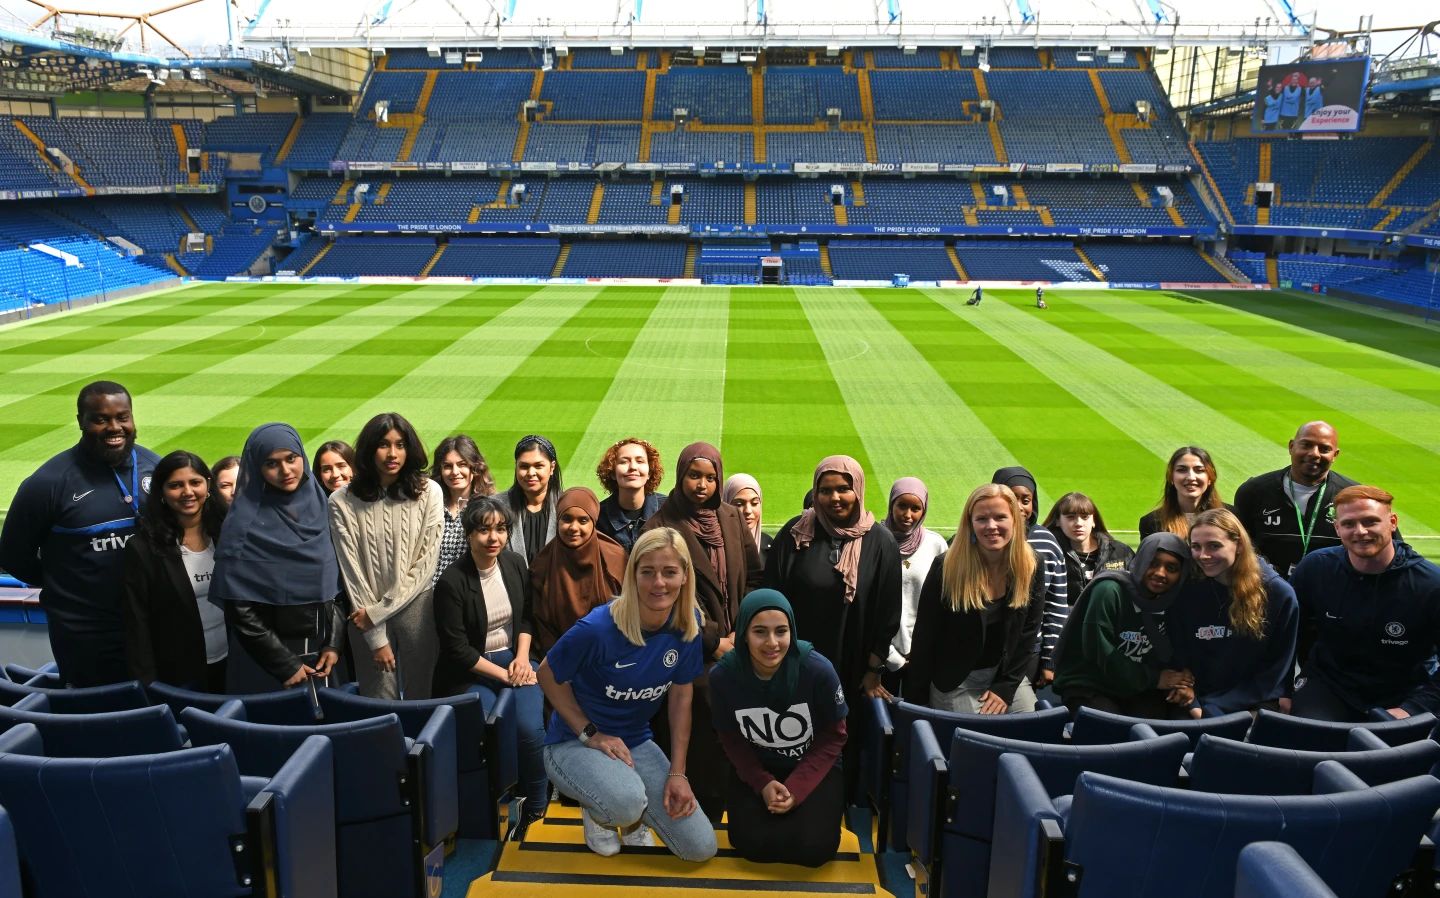 Trivago and Chelsea team up to provide the ultimate fan experience